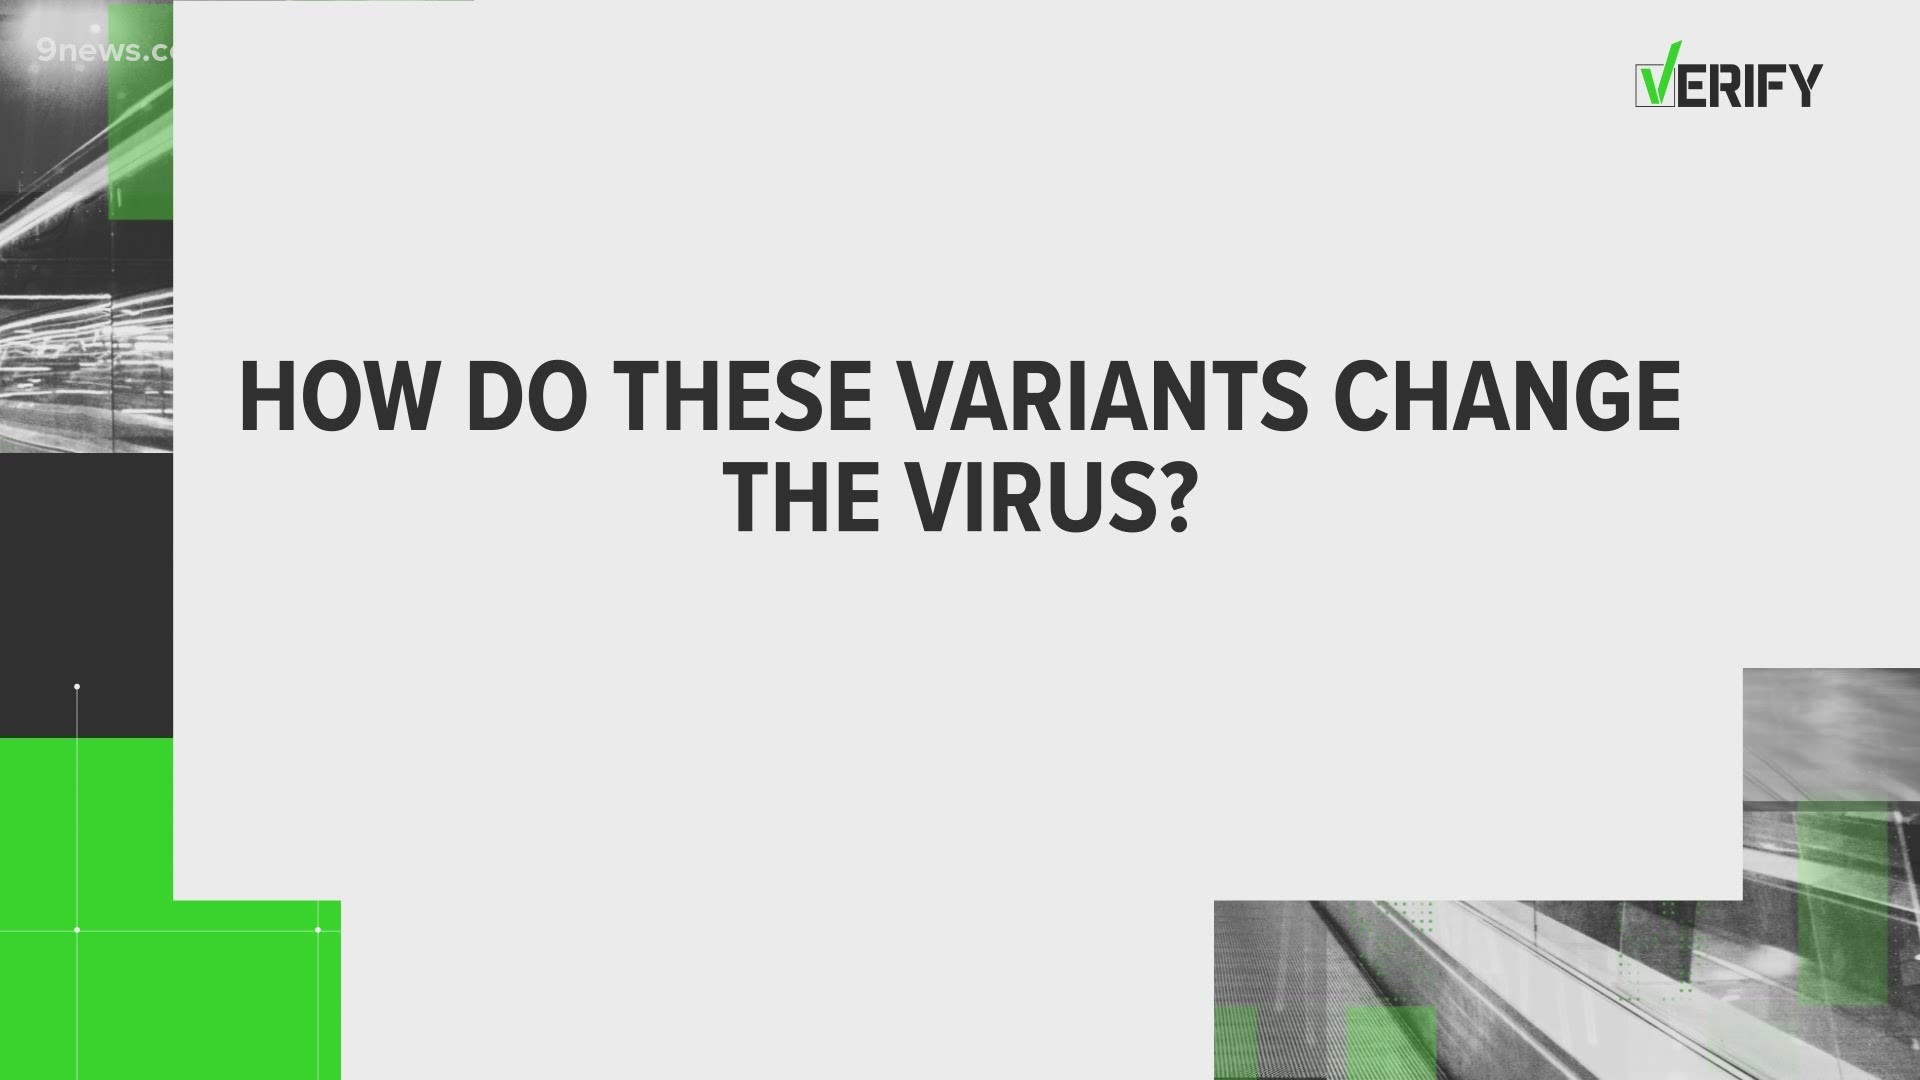 It's normal for a virus to mutate, and there are five COVID-19 variants of concern.